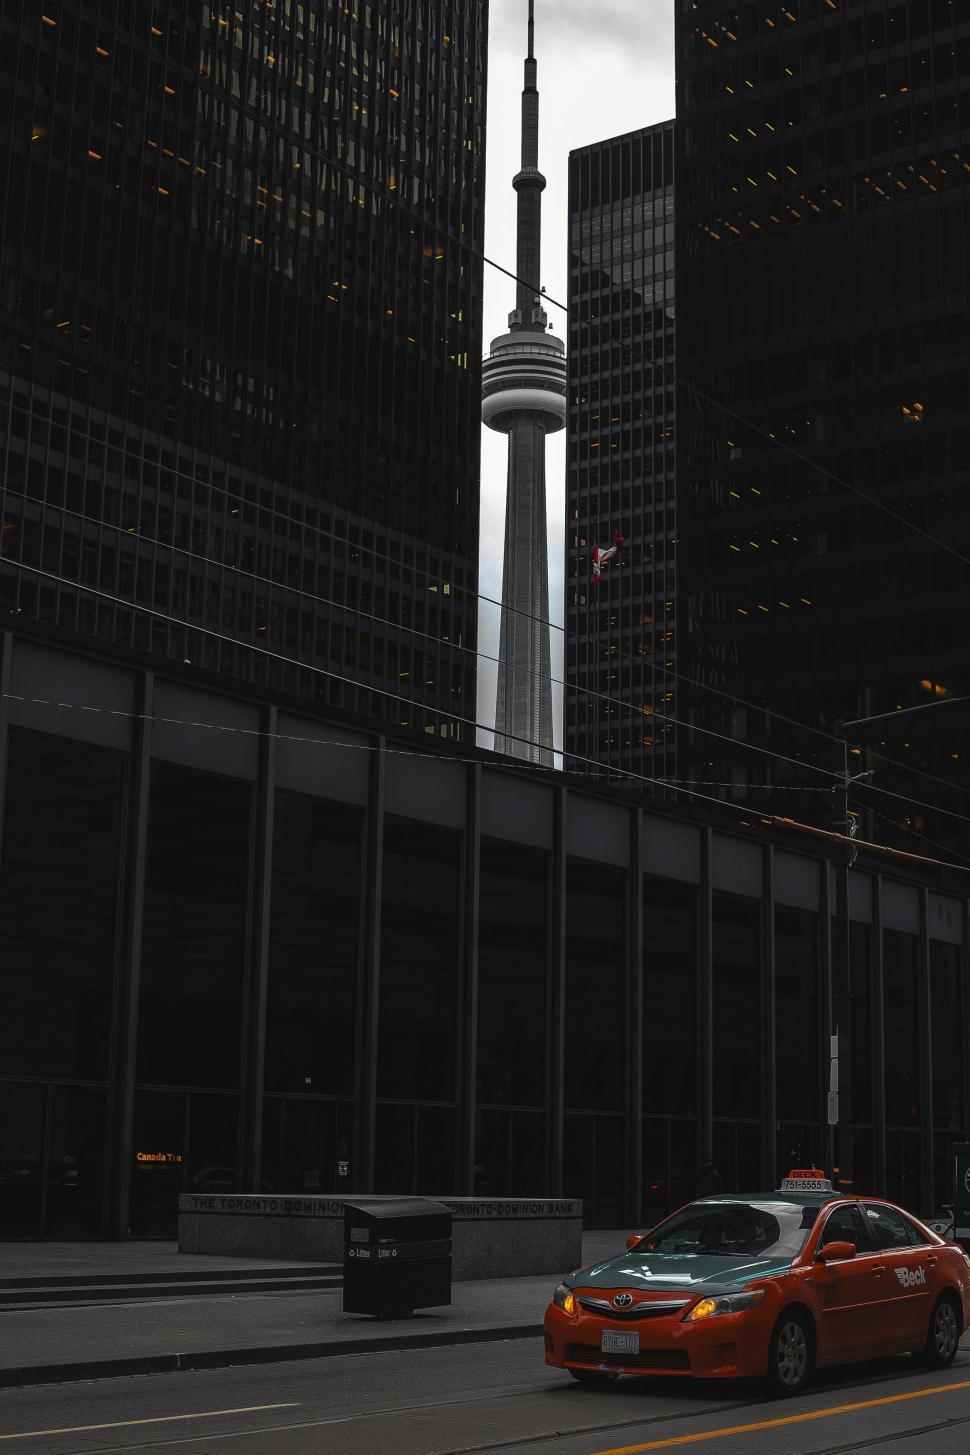 Free Image of Car Driving Down City Street With Tall Buildings 